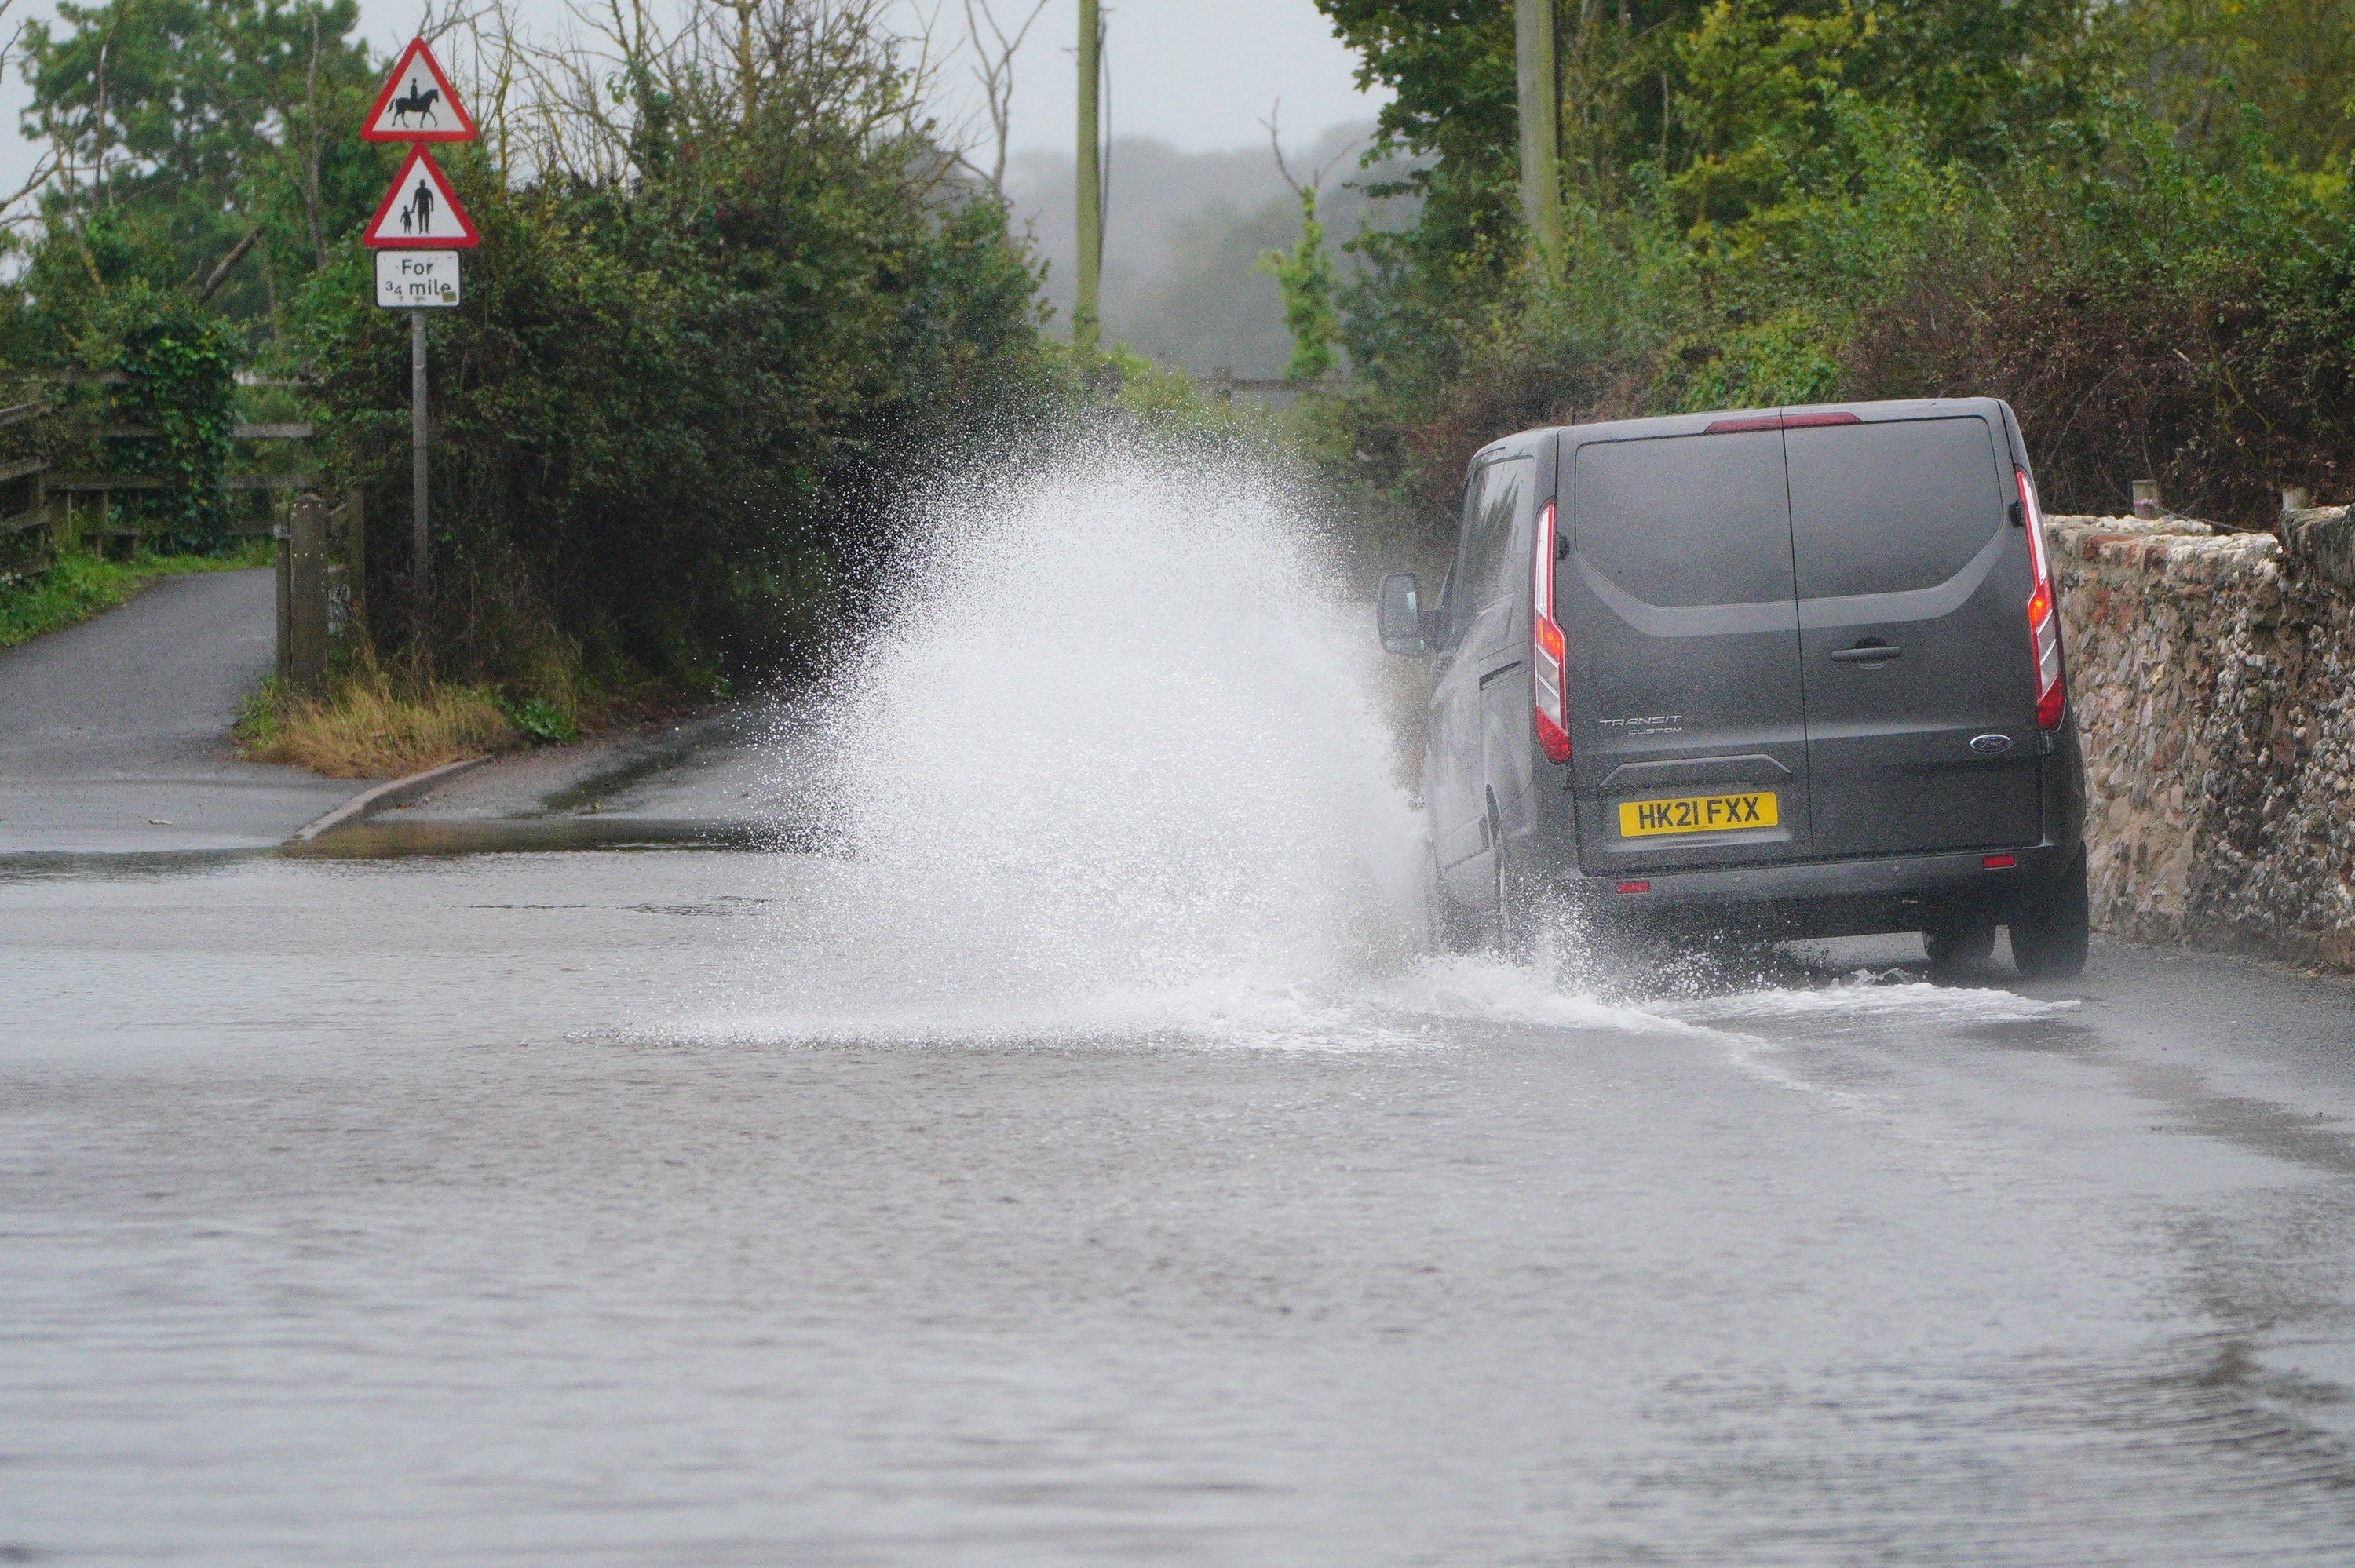 Flood warnings and alerts have been issued across England